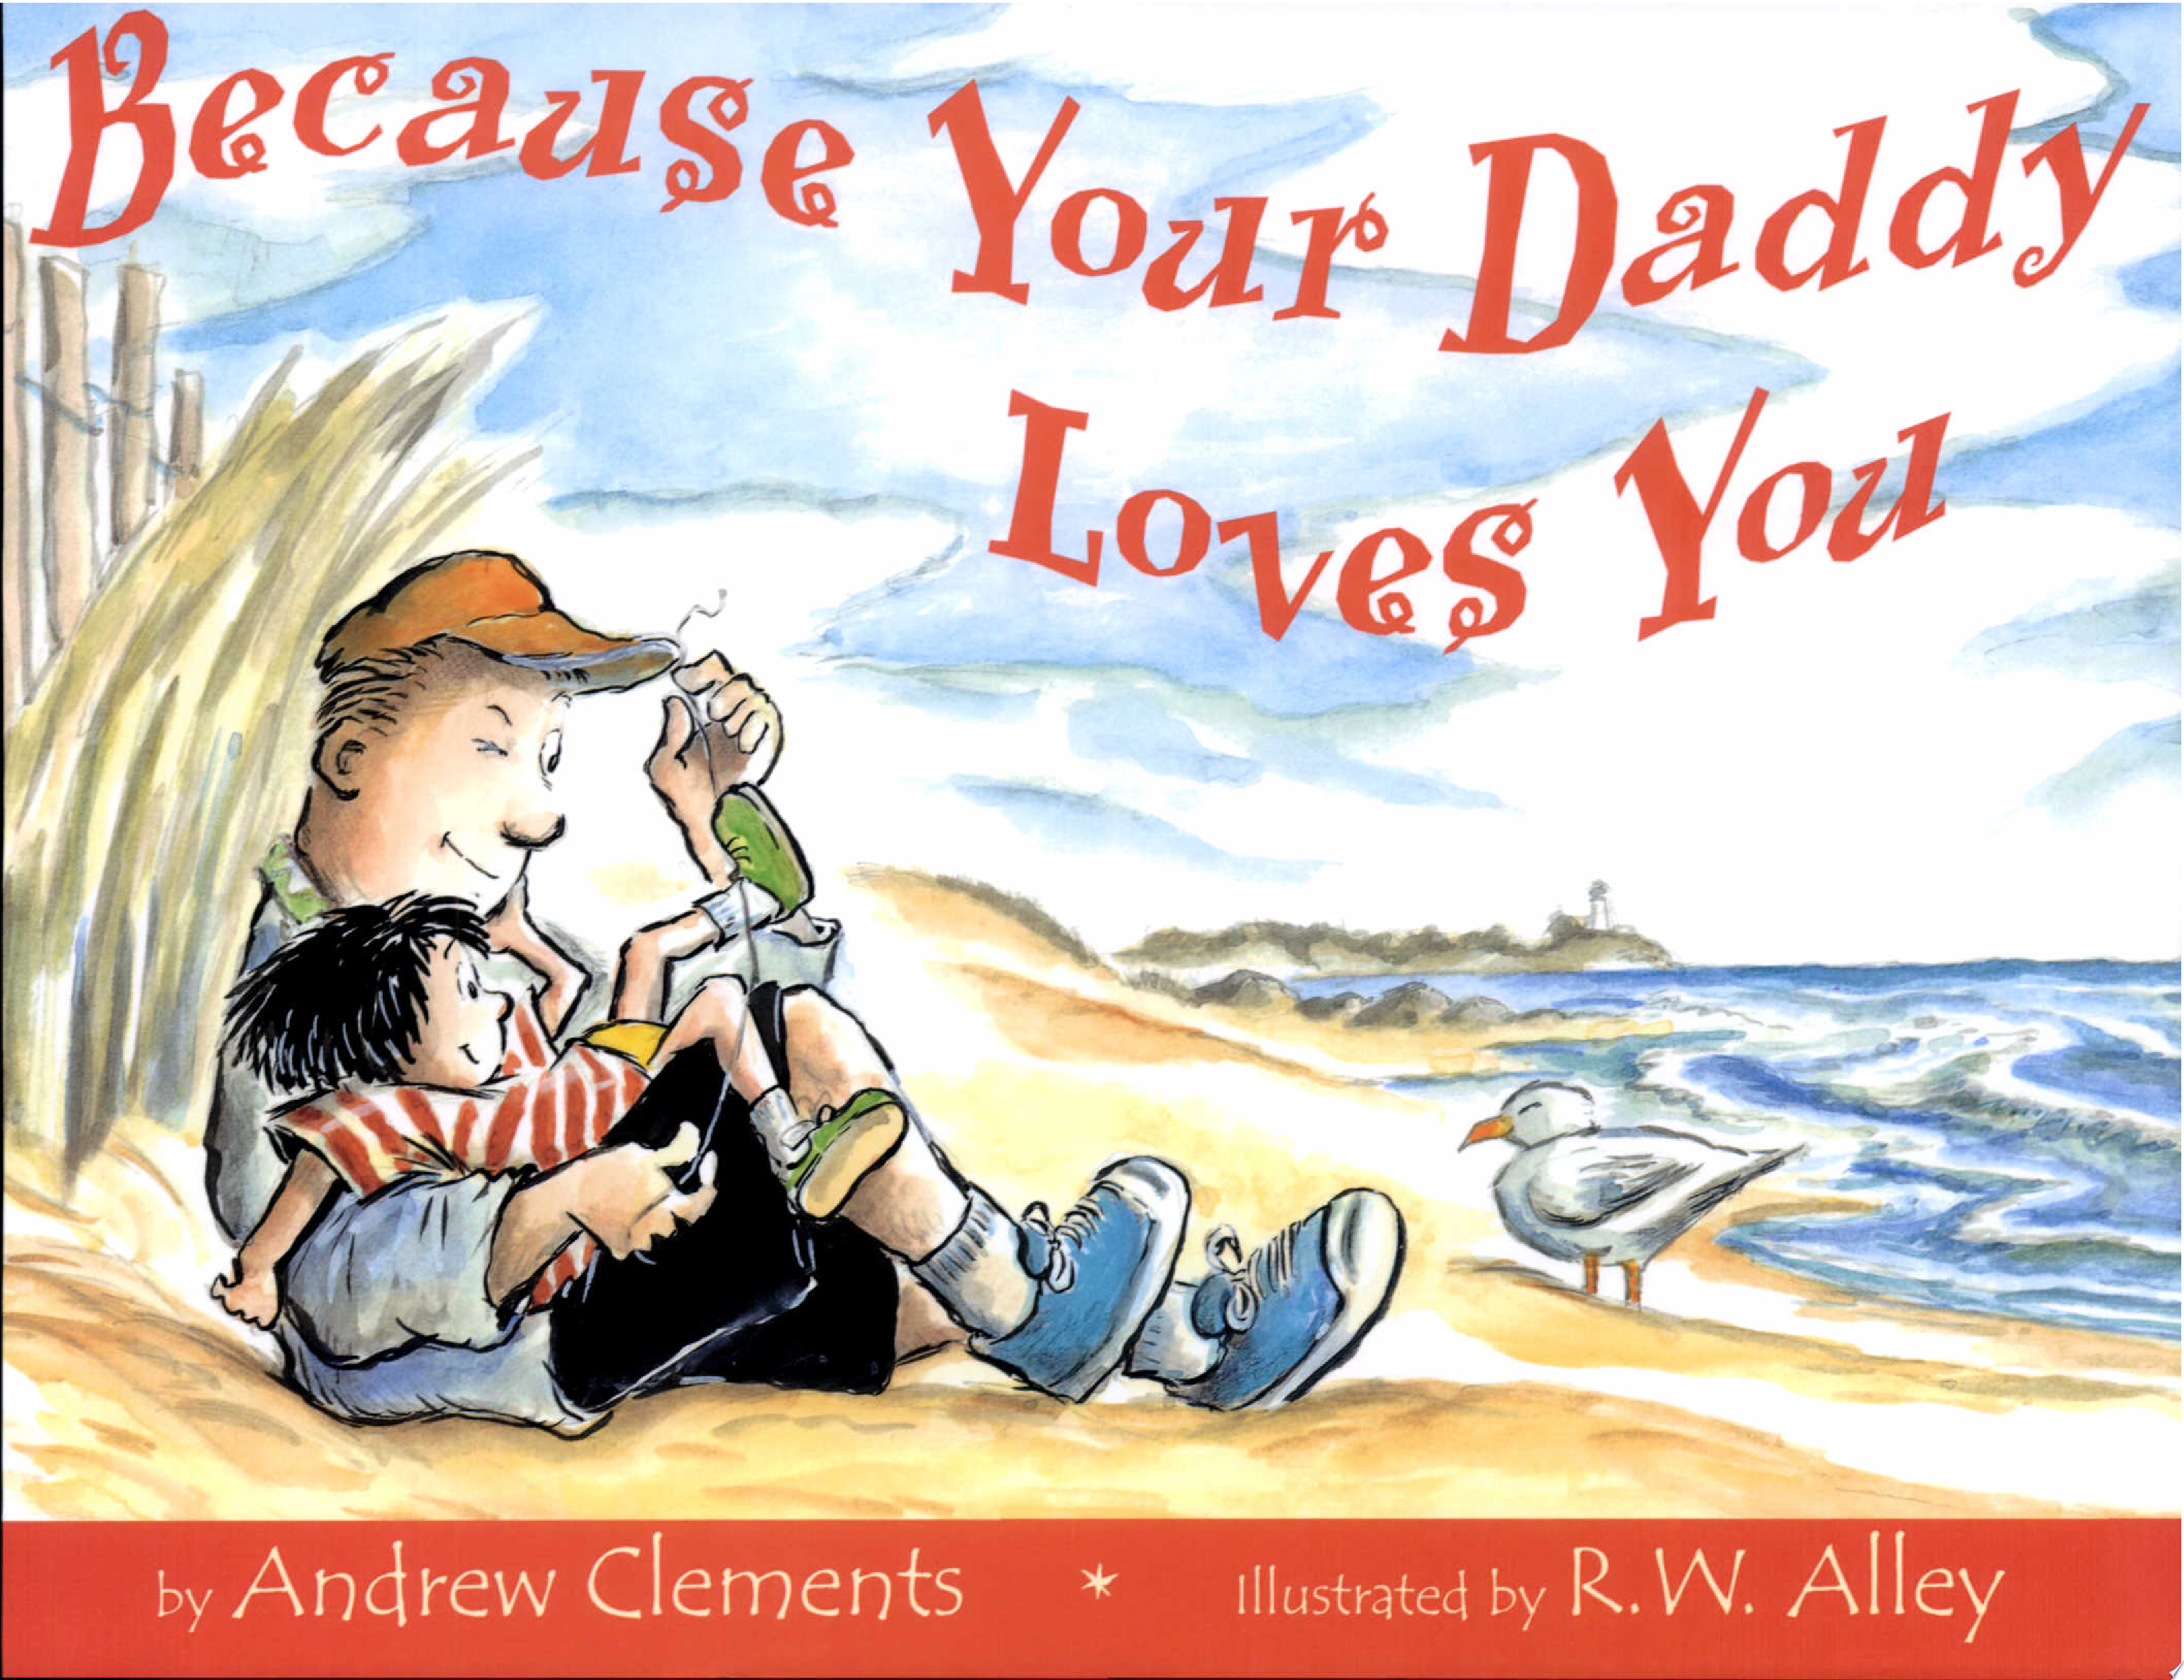 Image for "Because Your Daddy Loves You"